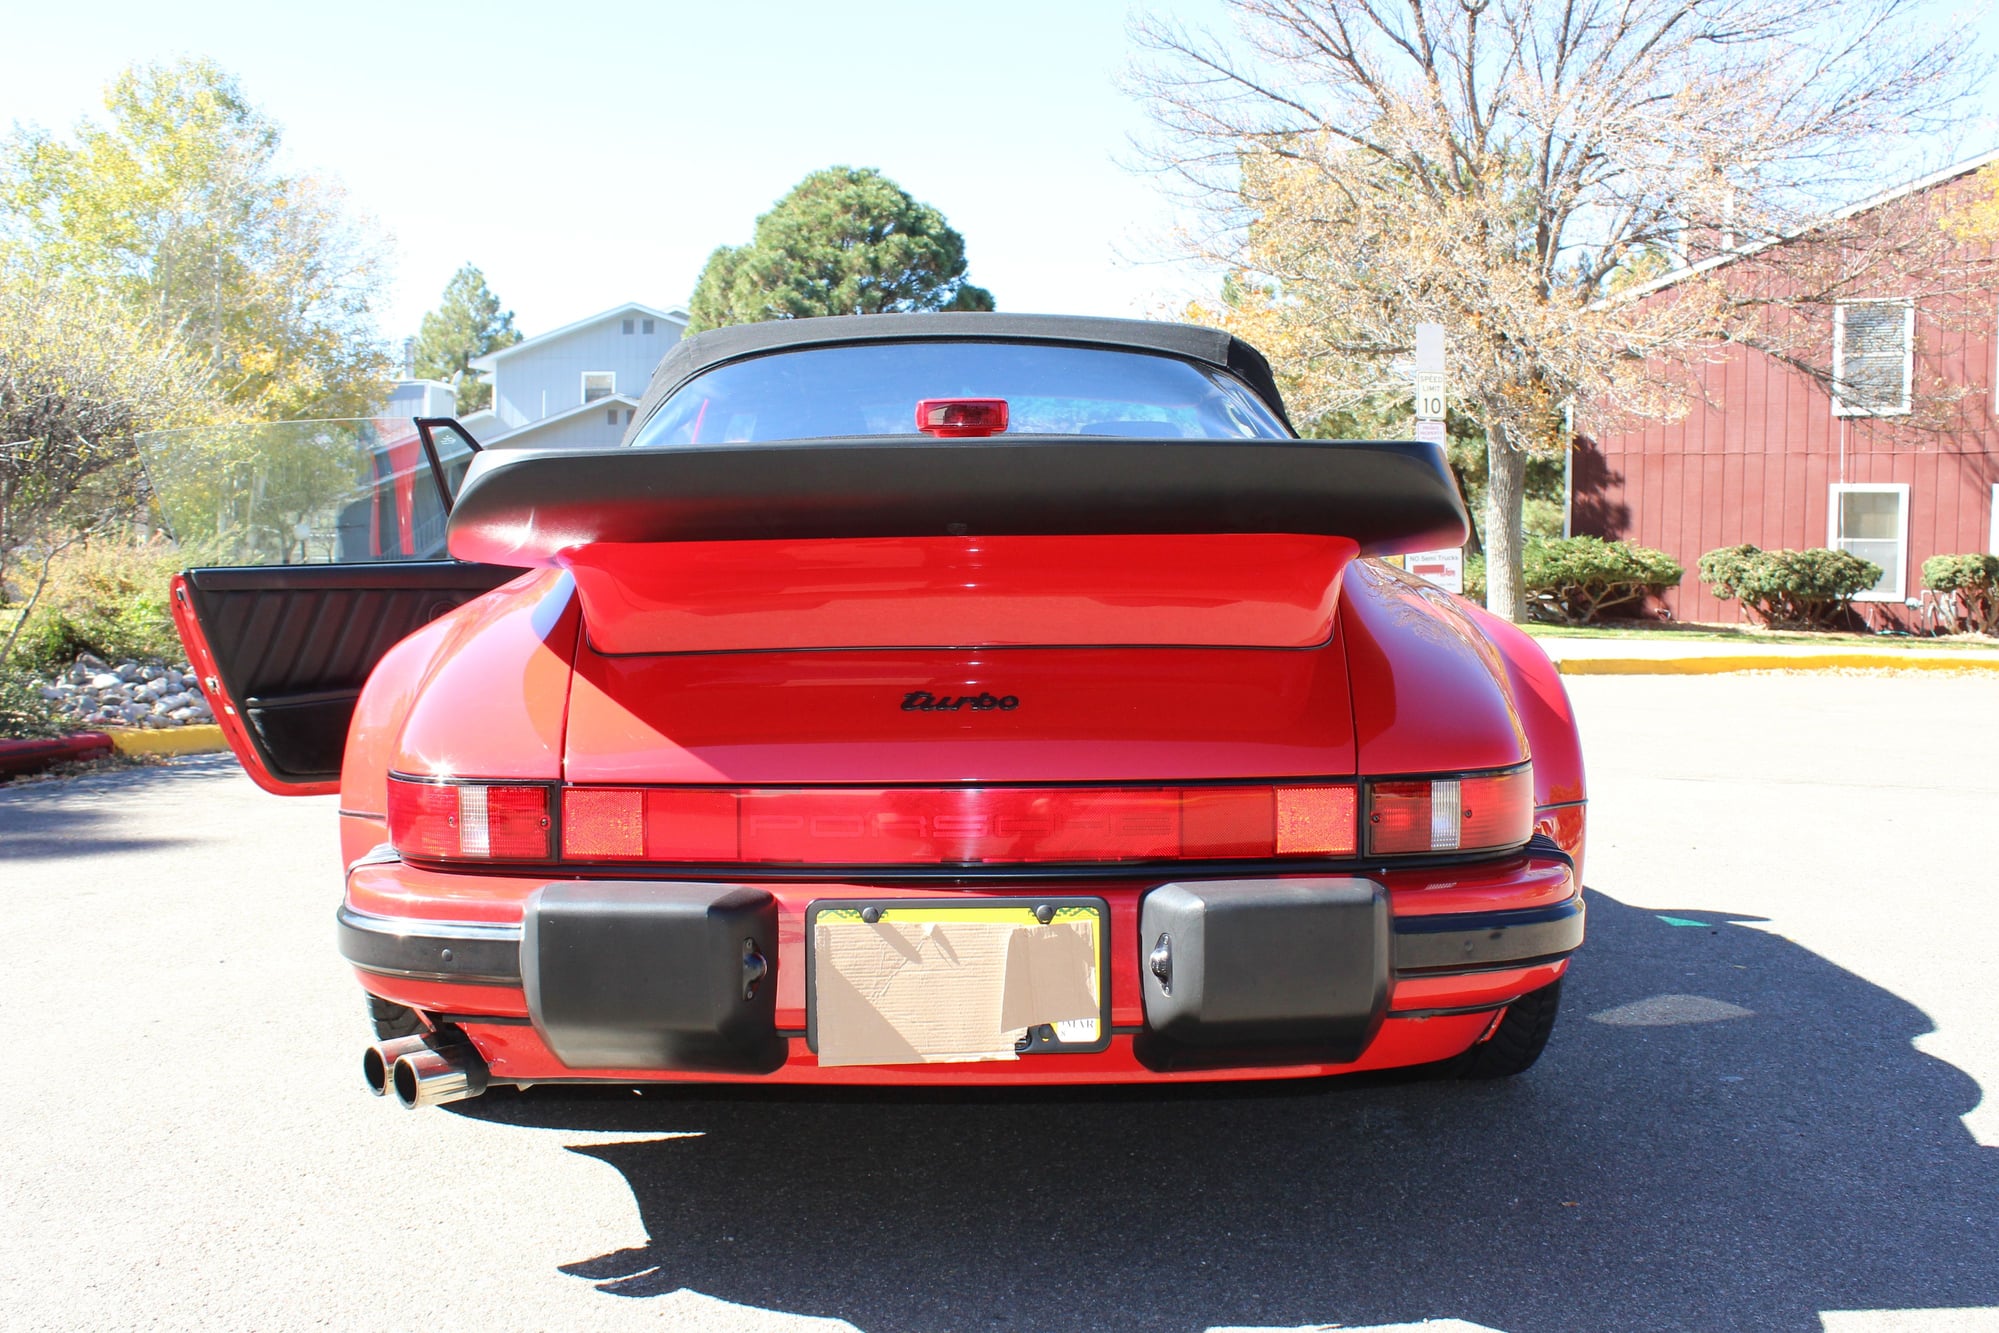 1988 Porsche 911 - 1988 930 Convertible. Red/Black. 70k miles. - Used - VIN WP0EB0938JS070557 - 69,000 Miles - 6 cyl - 2WD - Manual - Convertible - Red - Los Alamos, NM 87544, United States